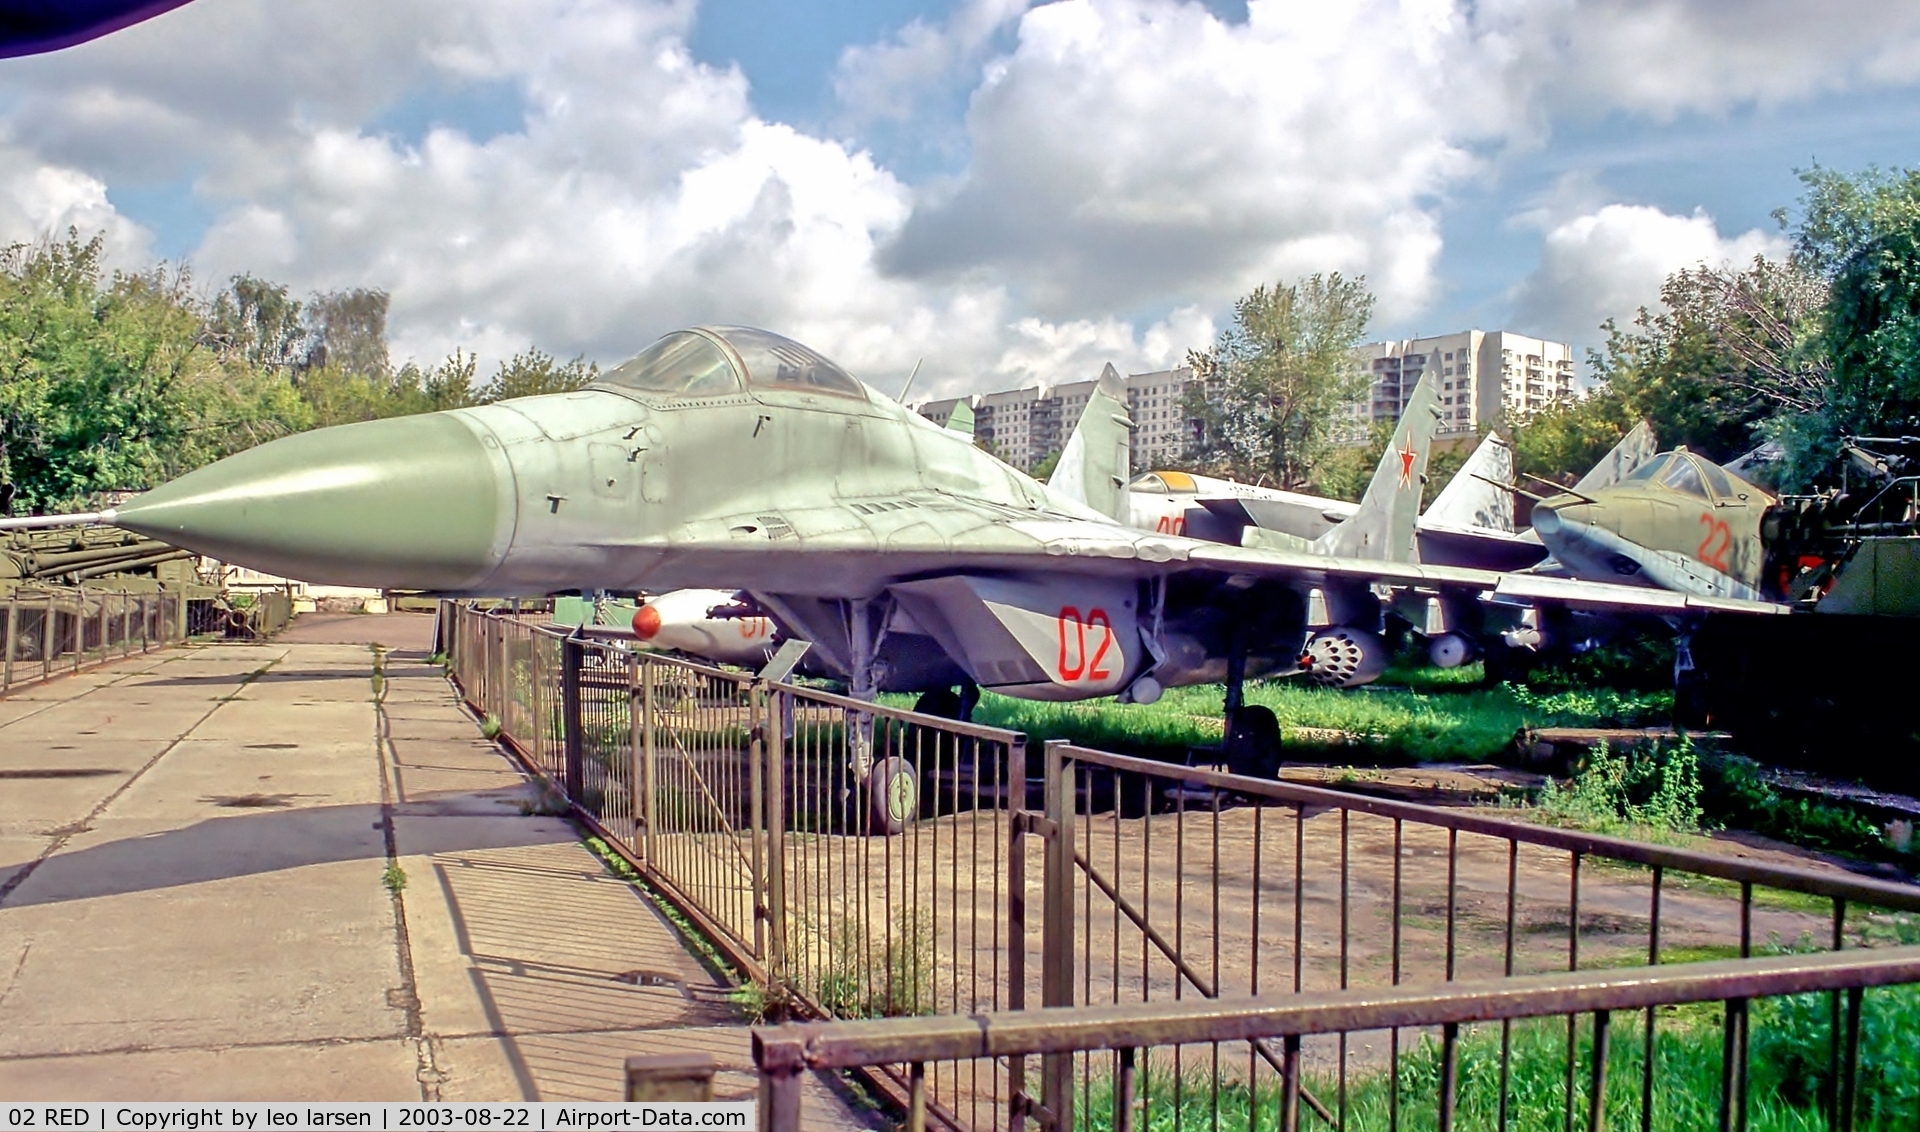 02 RED, Mikoyan-Gurevich MiG-29 C/N 2960515125, Central Museum of Armed Forces Moscow 22.8.2003